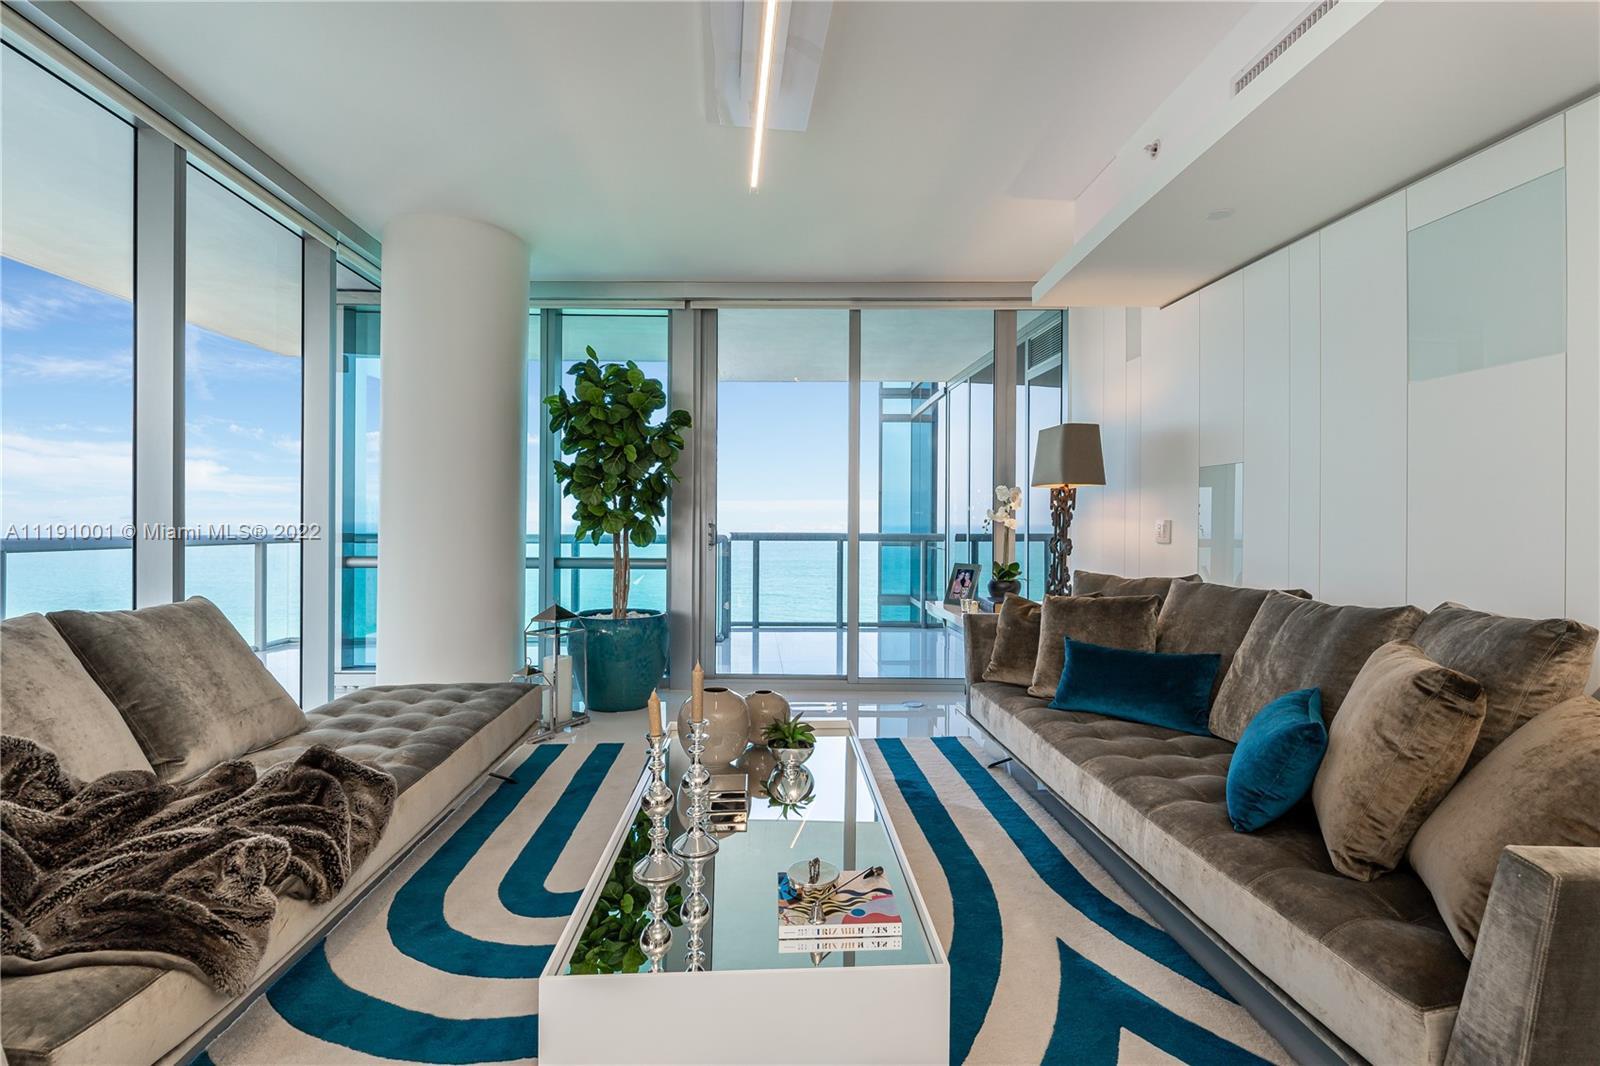 Spectacular fully furnished oceanfront residence at Jade Ocean. Professionally decorated 3 beds/3.5 